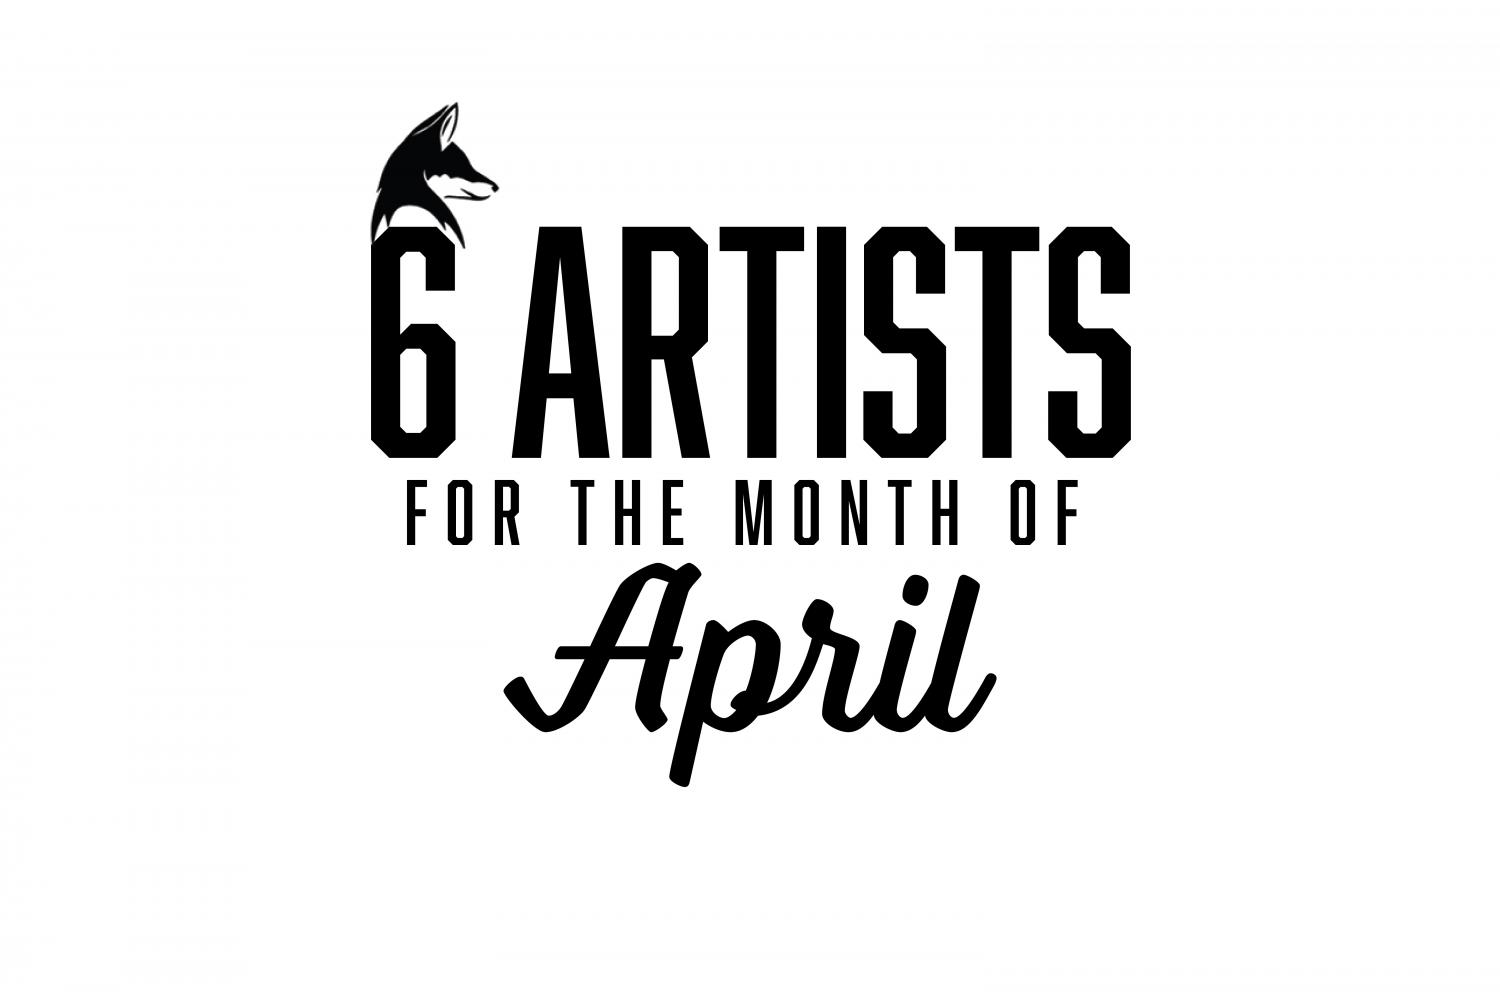 Six Artists You Should Be Listening To: April 2021 EDITION